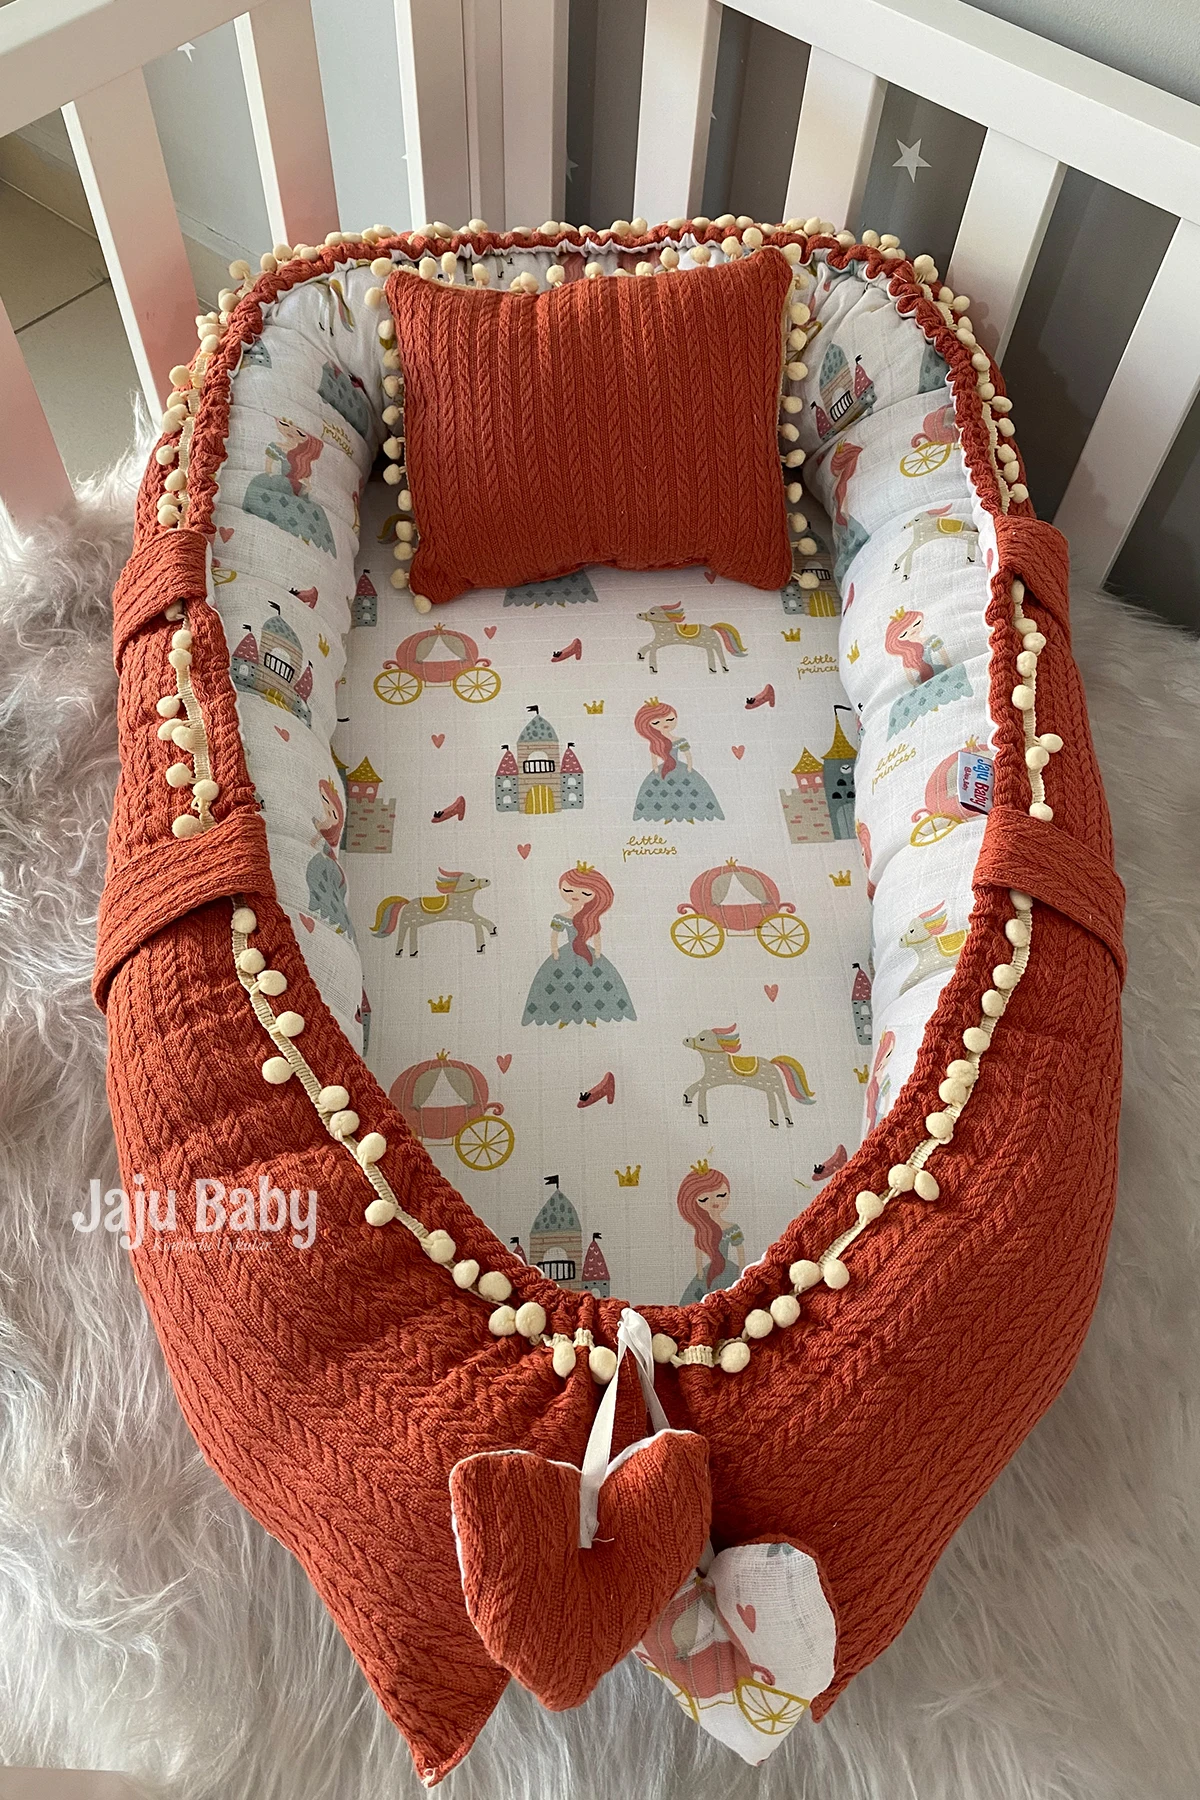 Jaju Baby Special Handmade Tile Knit Fabric and Muslin Fabric Pompon Babynest, Portable Crib Travel Bed, Newborn Baby Bed